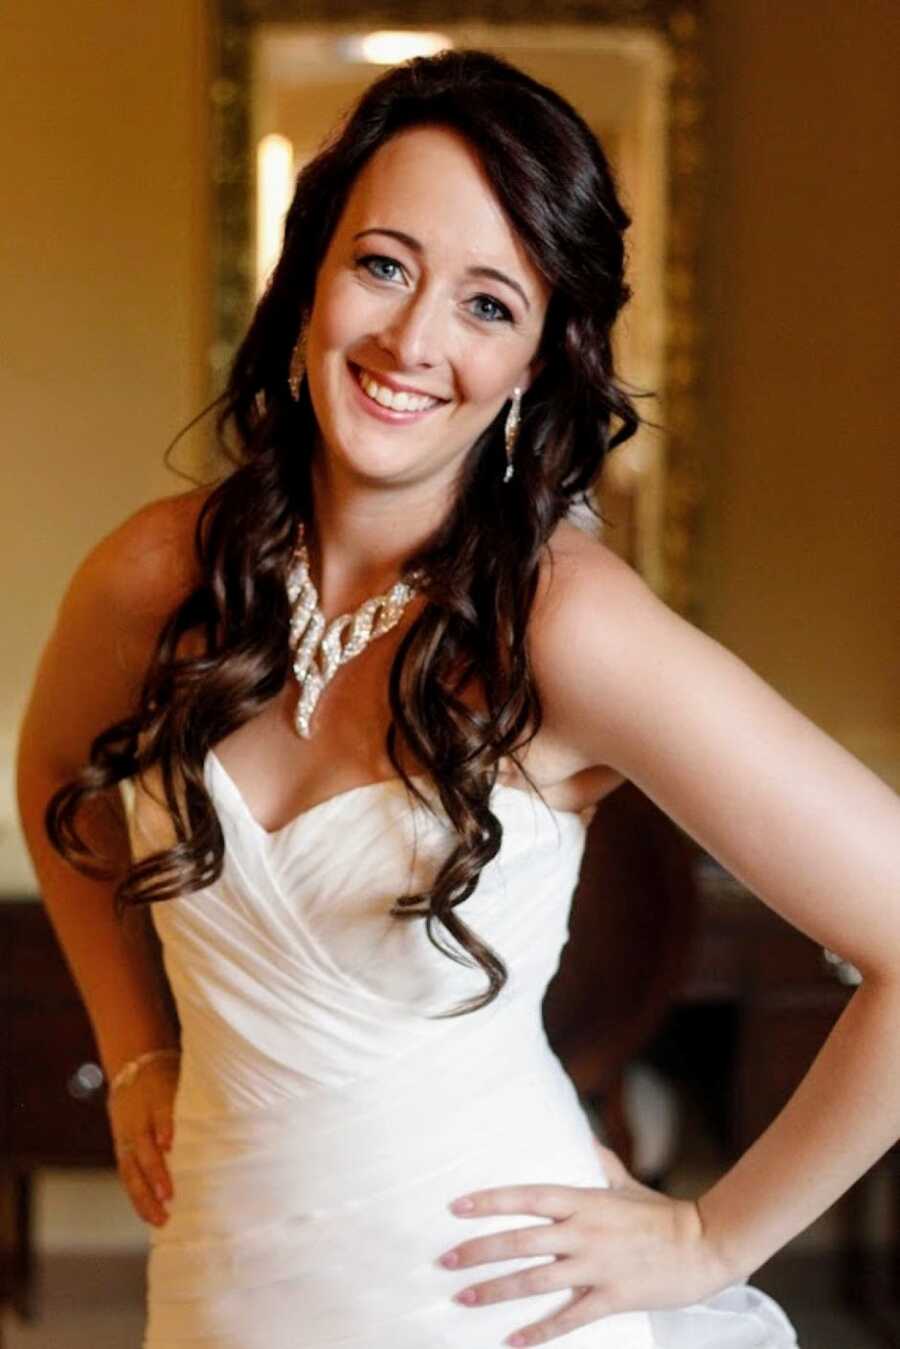 Young woman smiles big in her wedding dress before the wedding ceremony